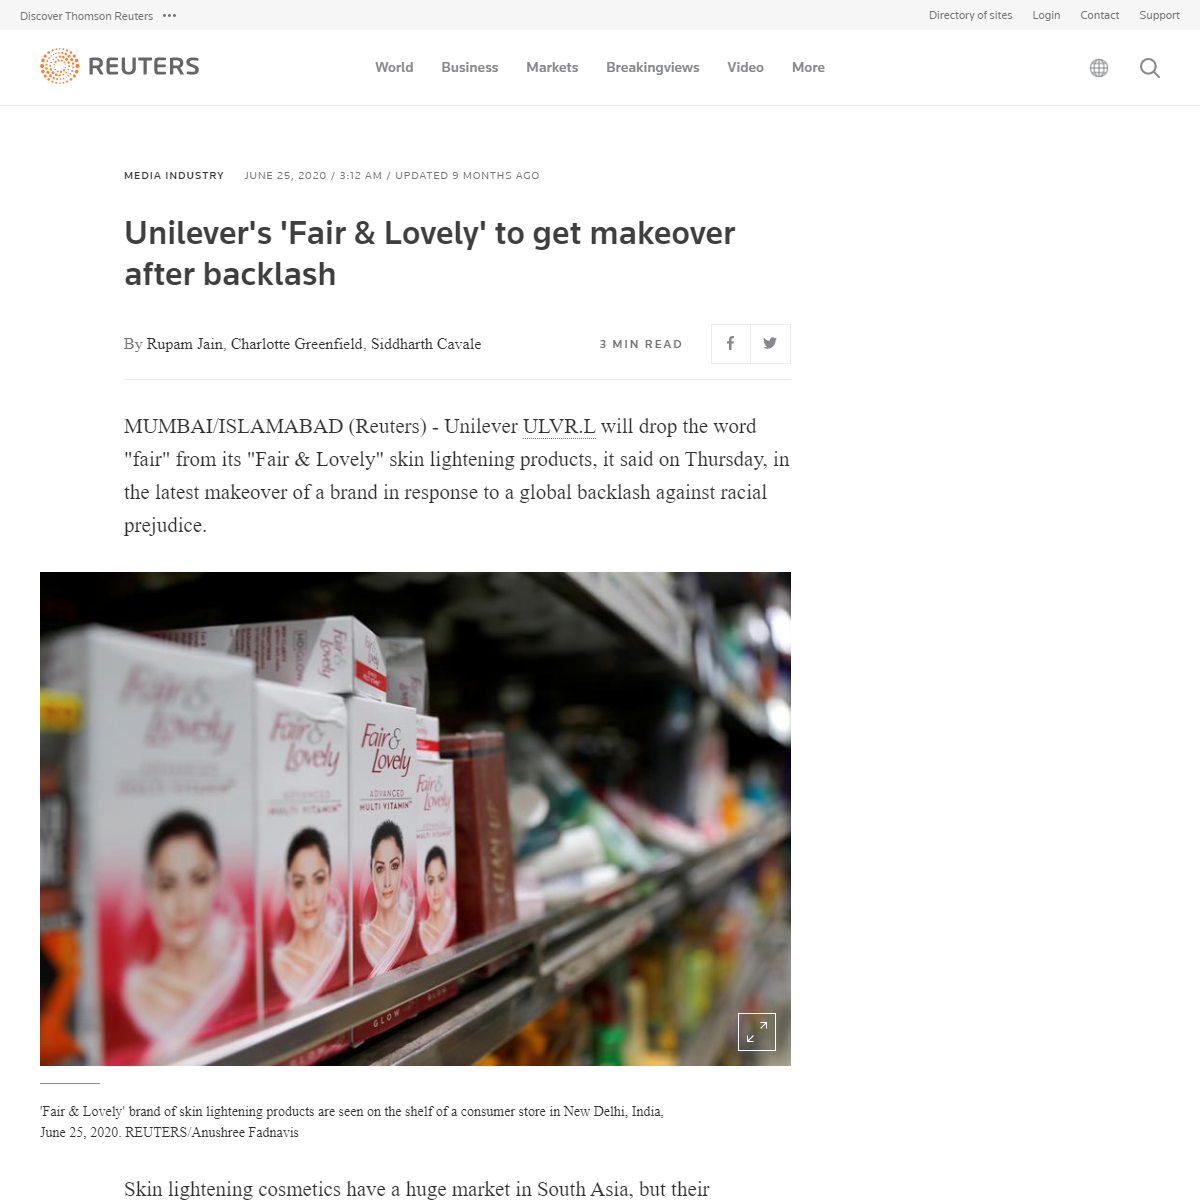 A complete backup of https://www.reuters.com/article/us-unilever-whitening-southasia-idUSKBN23W0W9